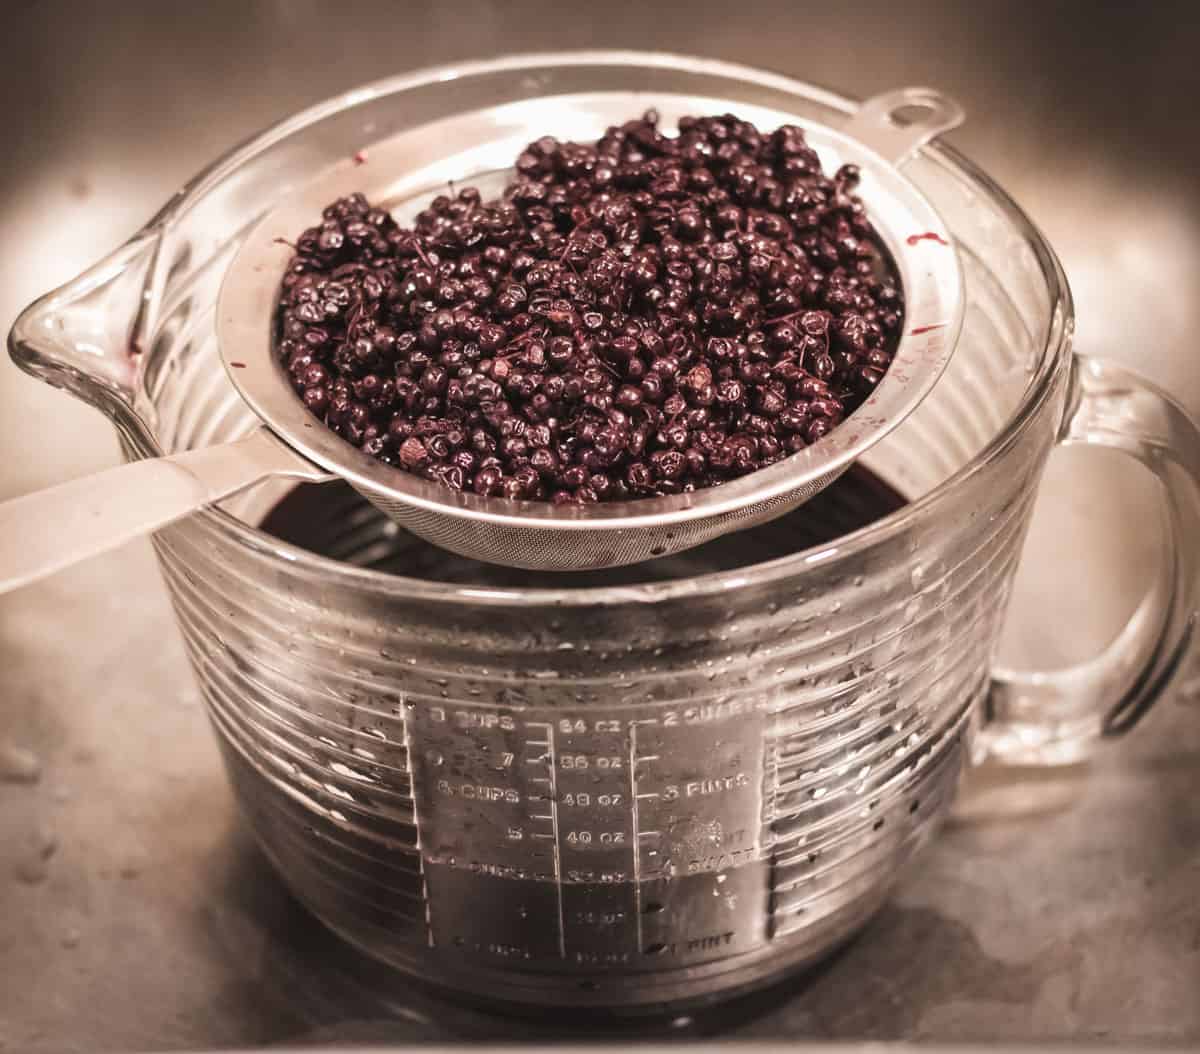 straining out the elderberries